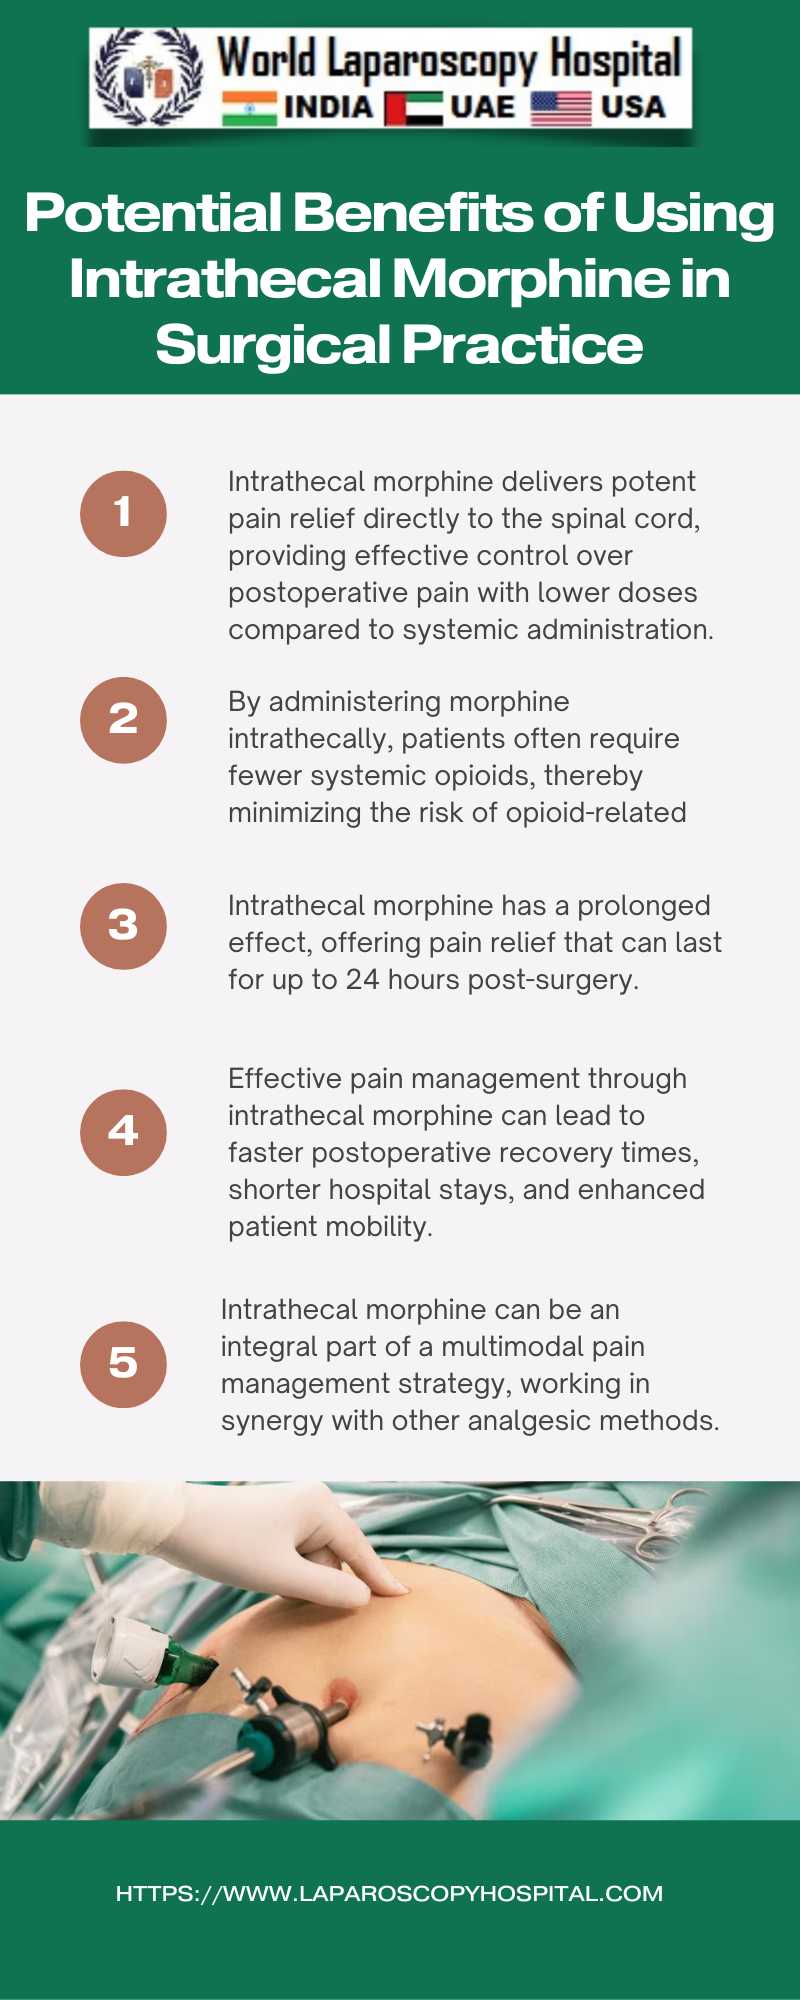 Potential Benefits of Using Intrathecal Morphine in Surgical Practice